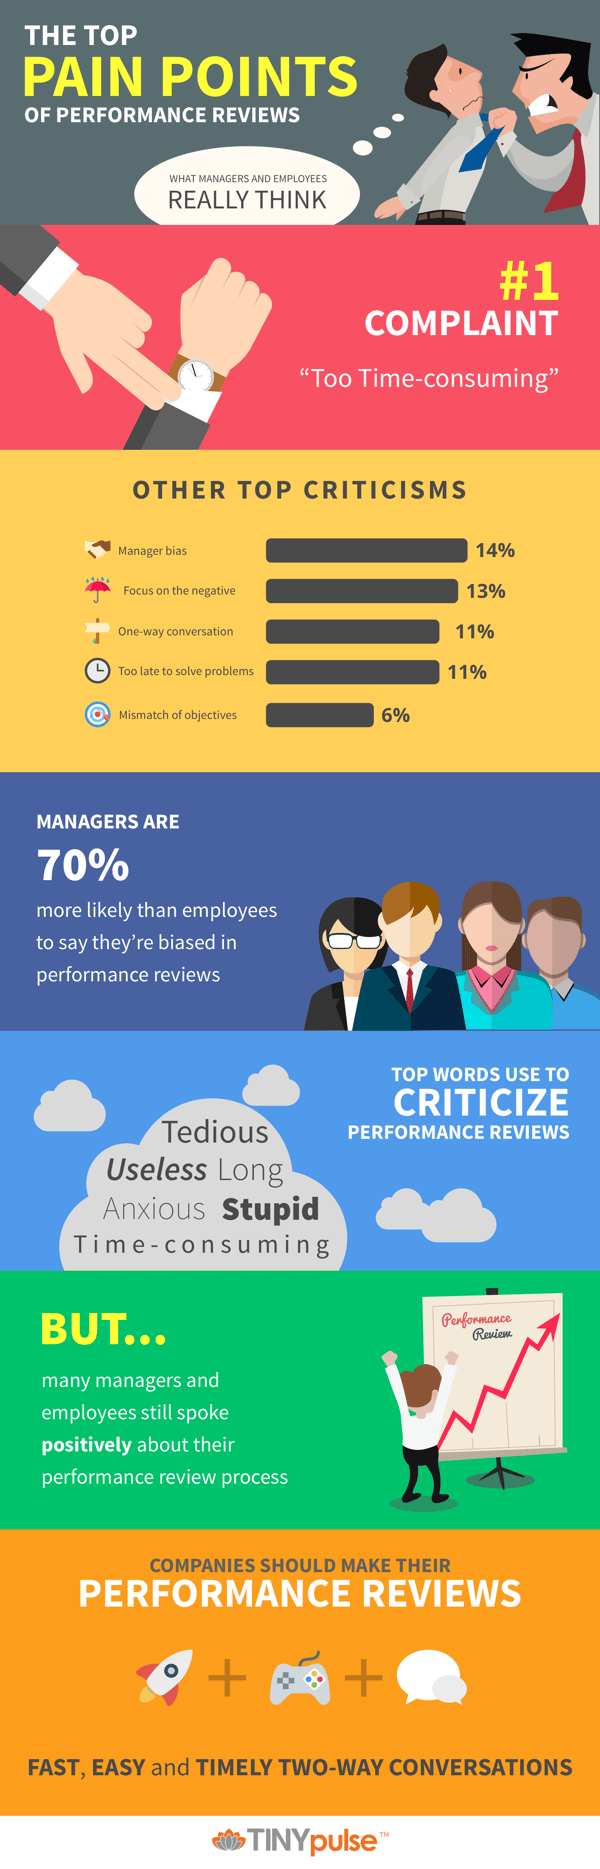 The Truth Behind Performance Reviews Infographic by TINYpulse